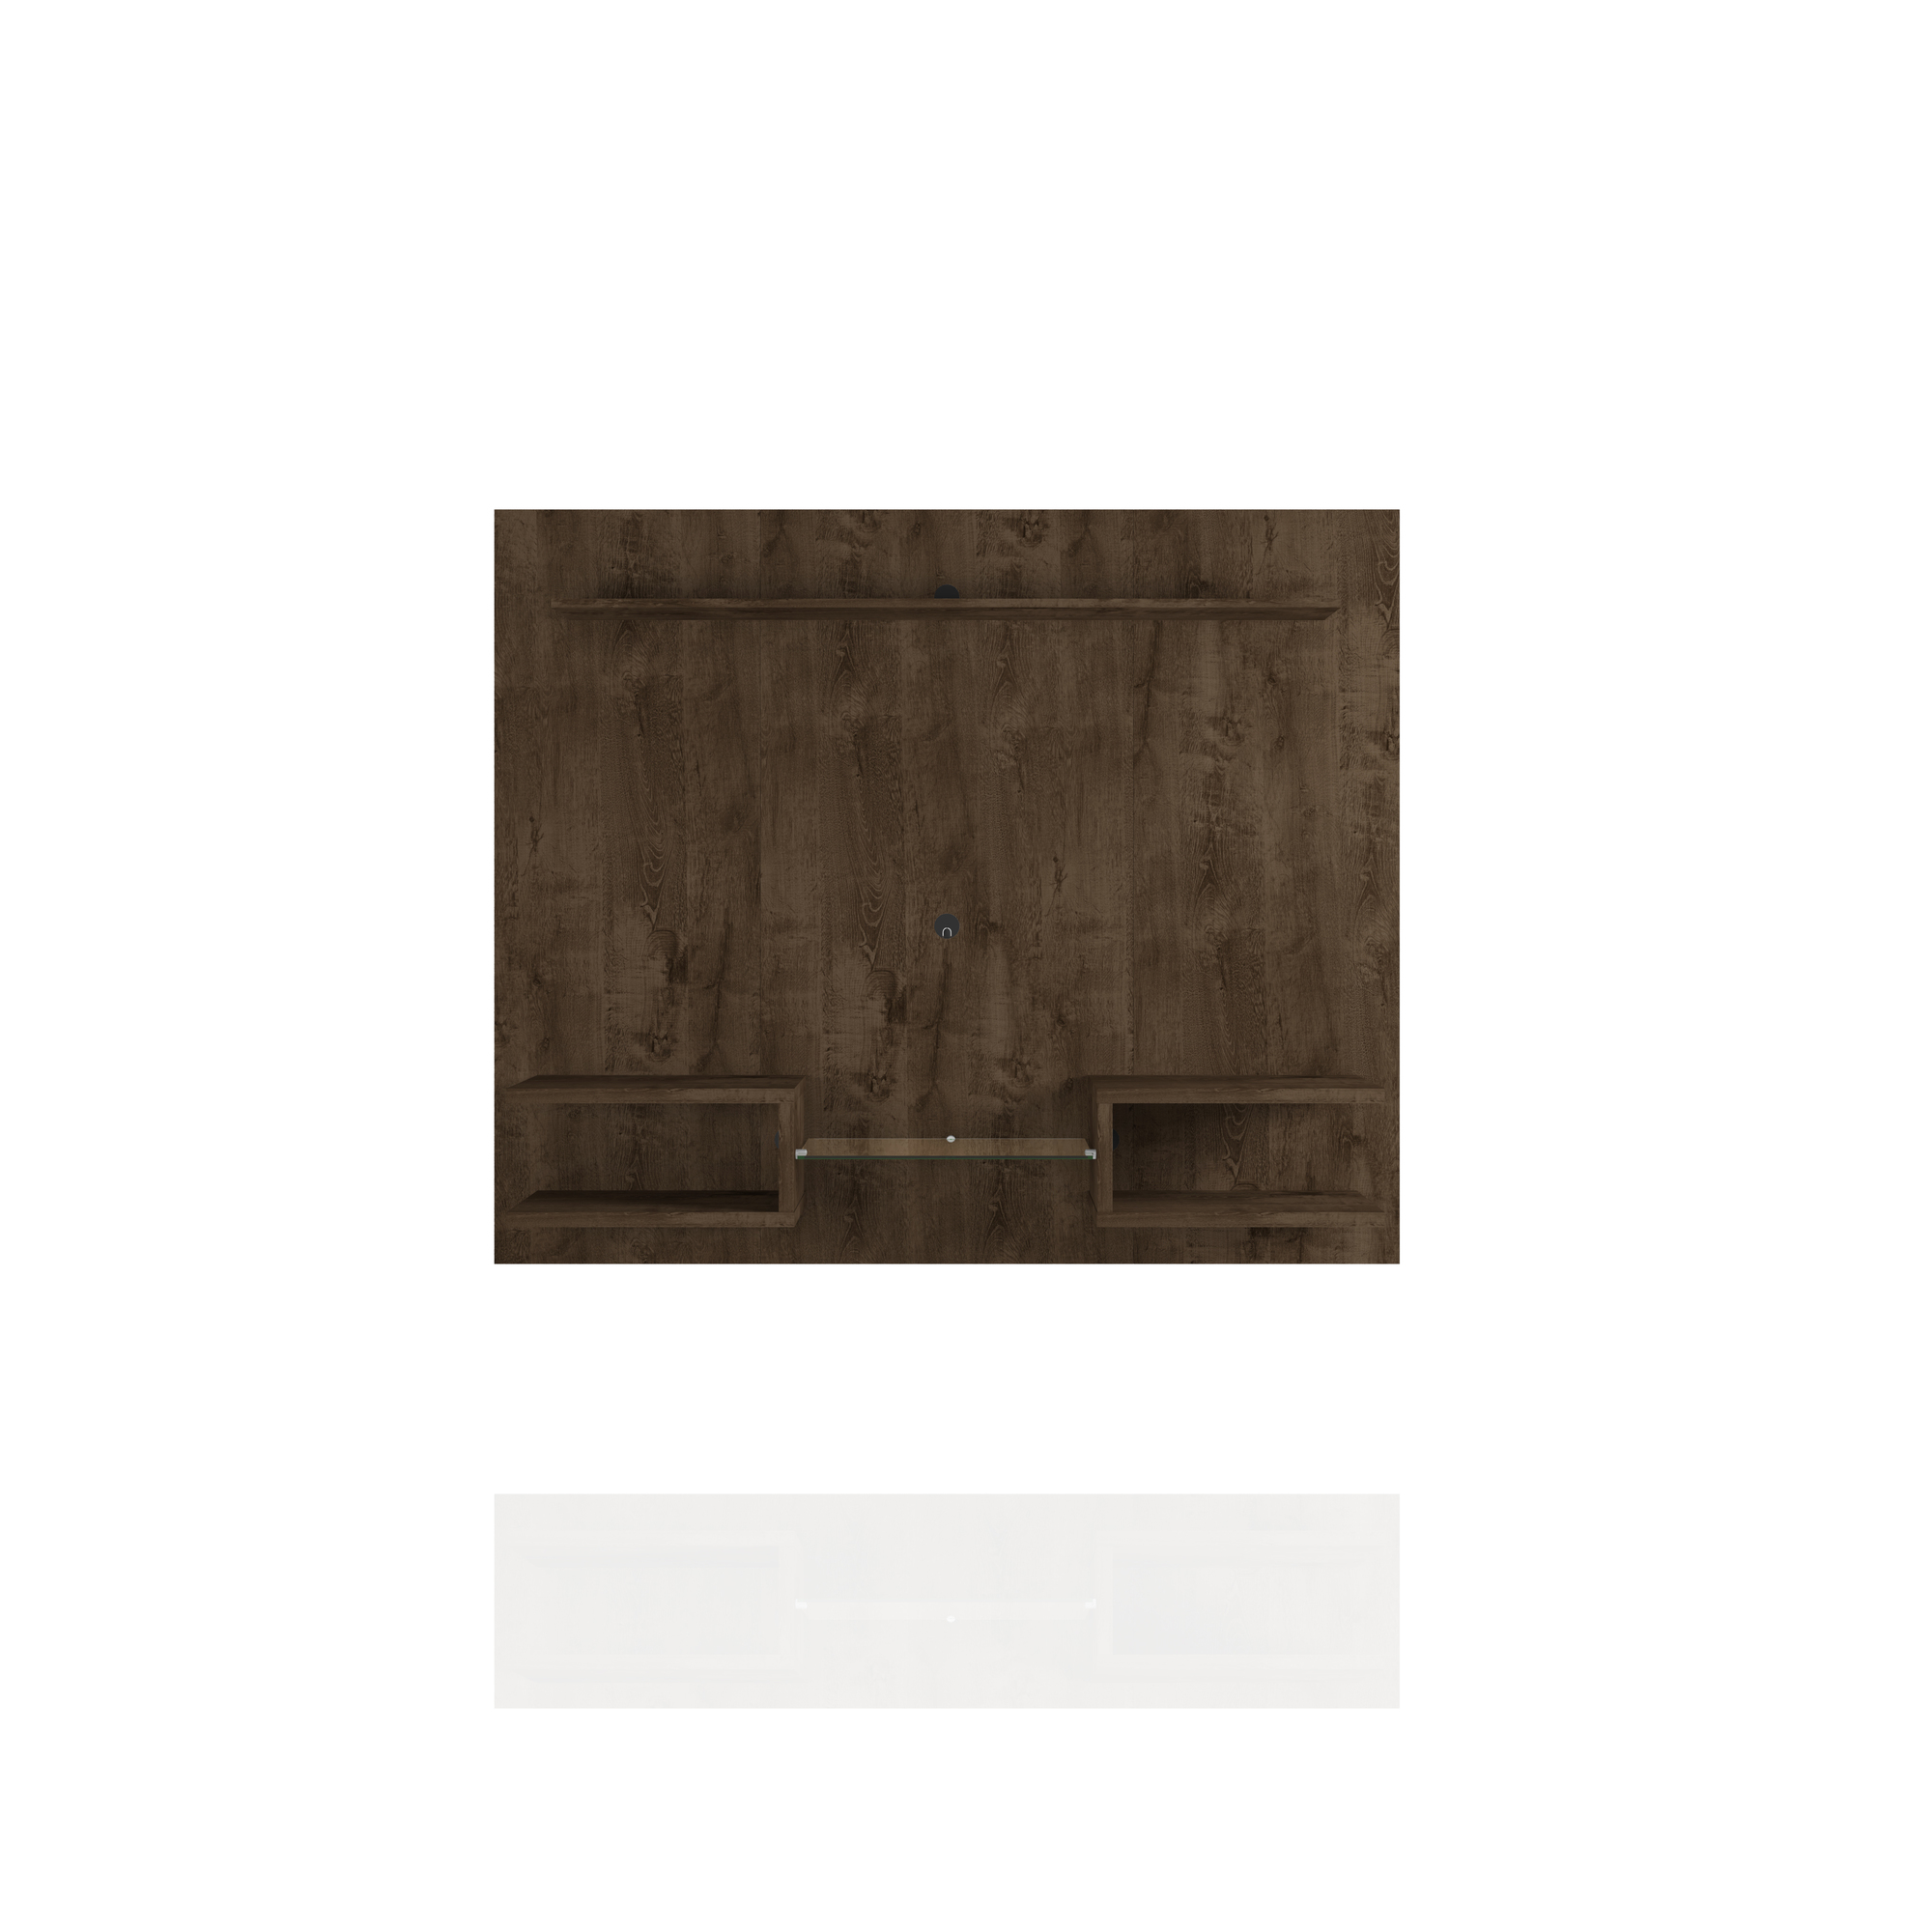 Manhattan Comfort, Plaza 64.25 Modern Floating Wall Ent Cntr Brown, Width 64.25 in, Height 53.54 in, Depth 11.65 in, Model 224BMC